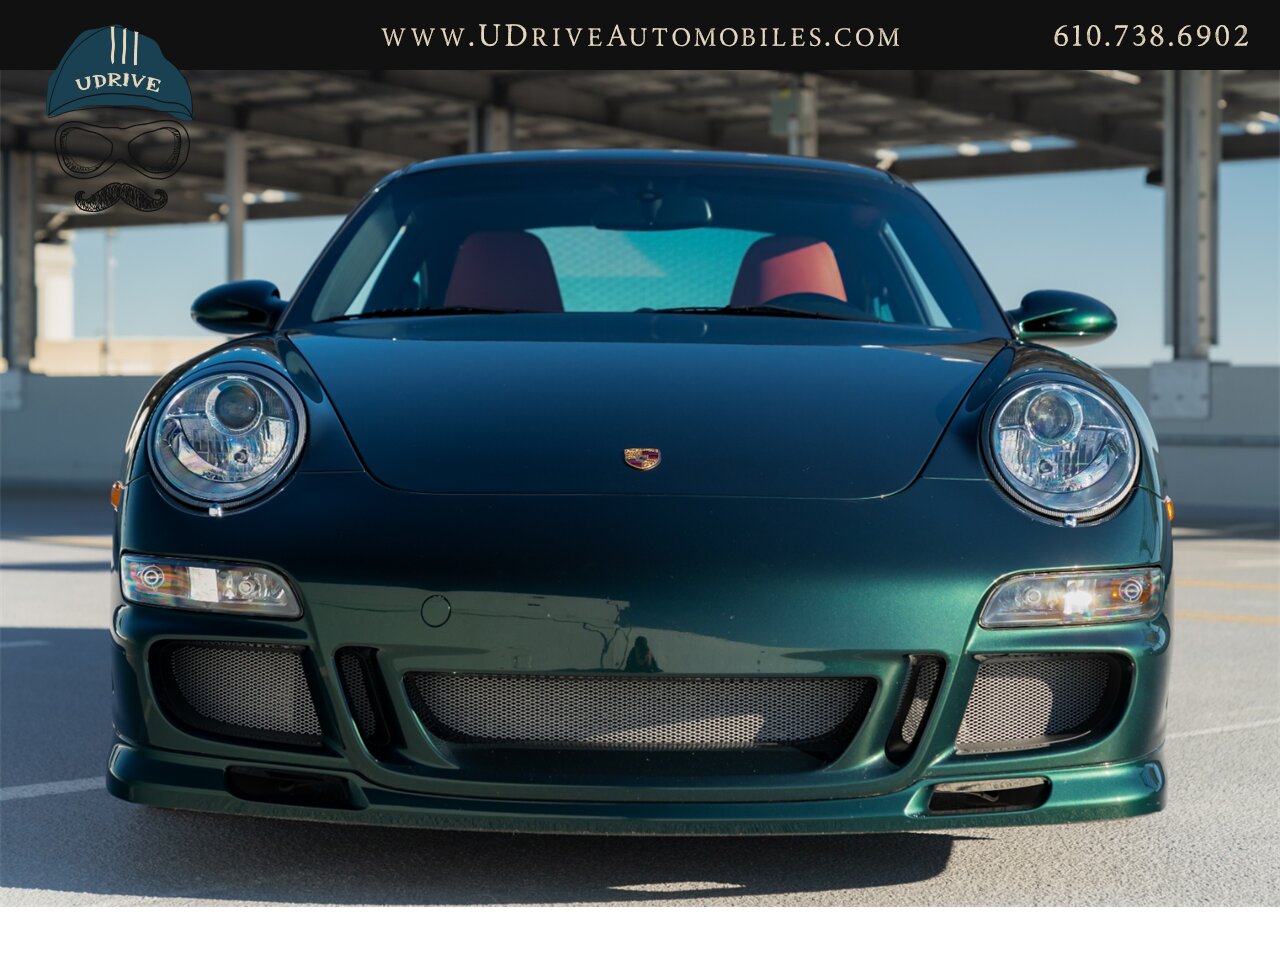 2007 Porsche 911 Carrera S 6Spd 997S RARE X51 Power Kit 381hp  1 of a Kind Forest Green over Blk/Terracotta Chrono Adap Sport Sts $113k MSRP - Photo 12 - West Chester, PA 19382